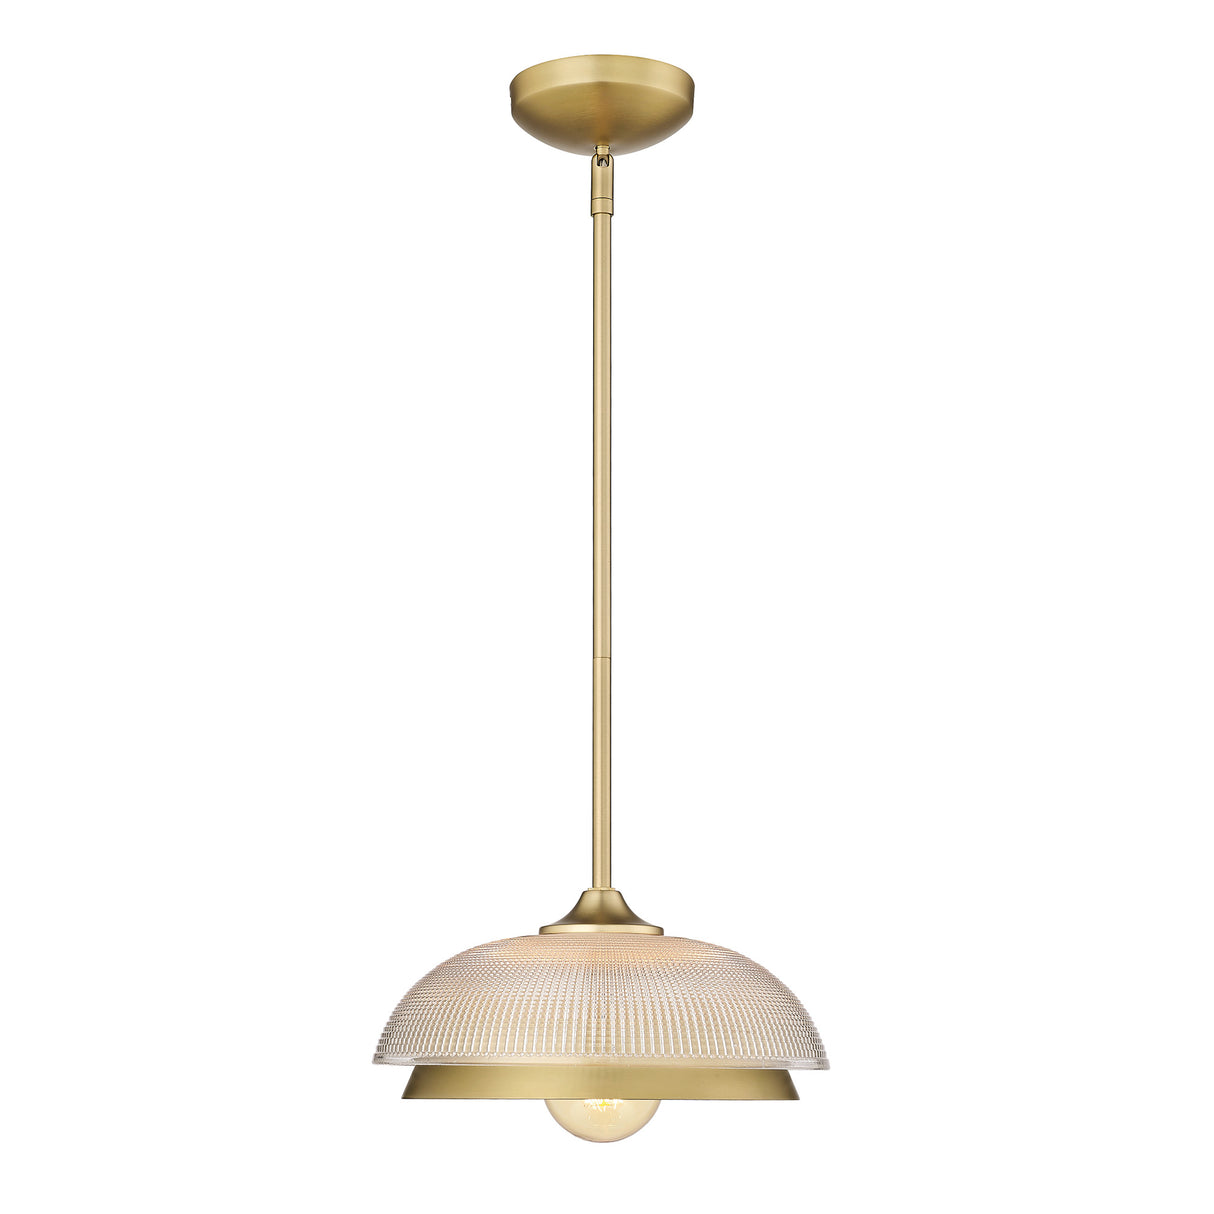 Crawford Mini Pendant in Brushed Champagne Bronze with Retro Prism Glass Shade